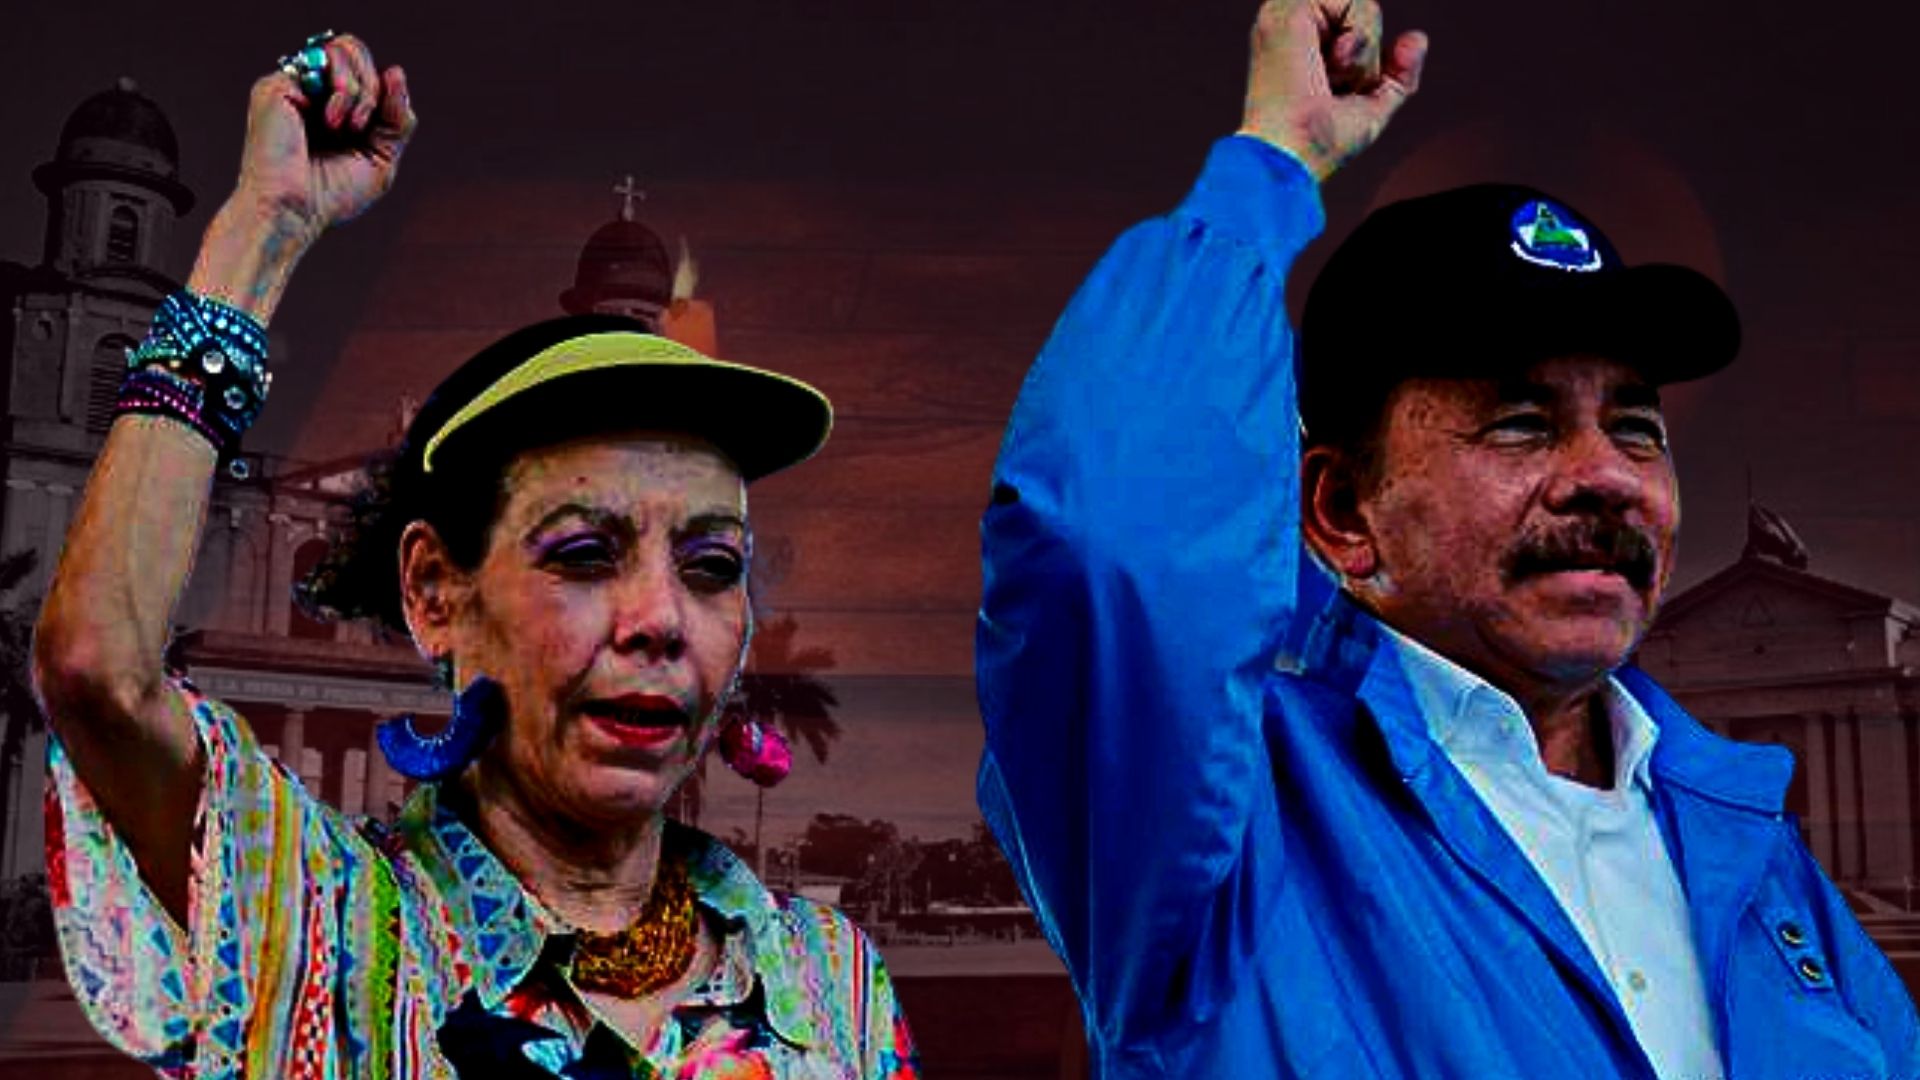 Ortega's regime, with its "recipe" of terror and threats, deepens its rejection